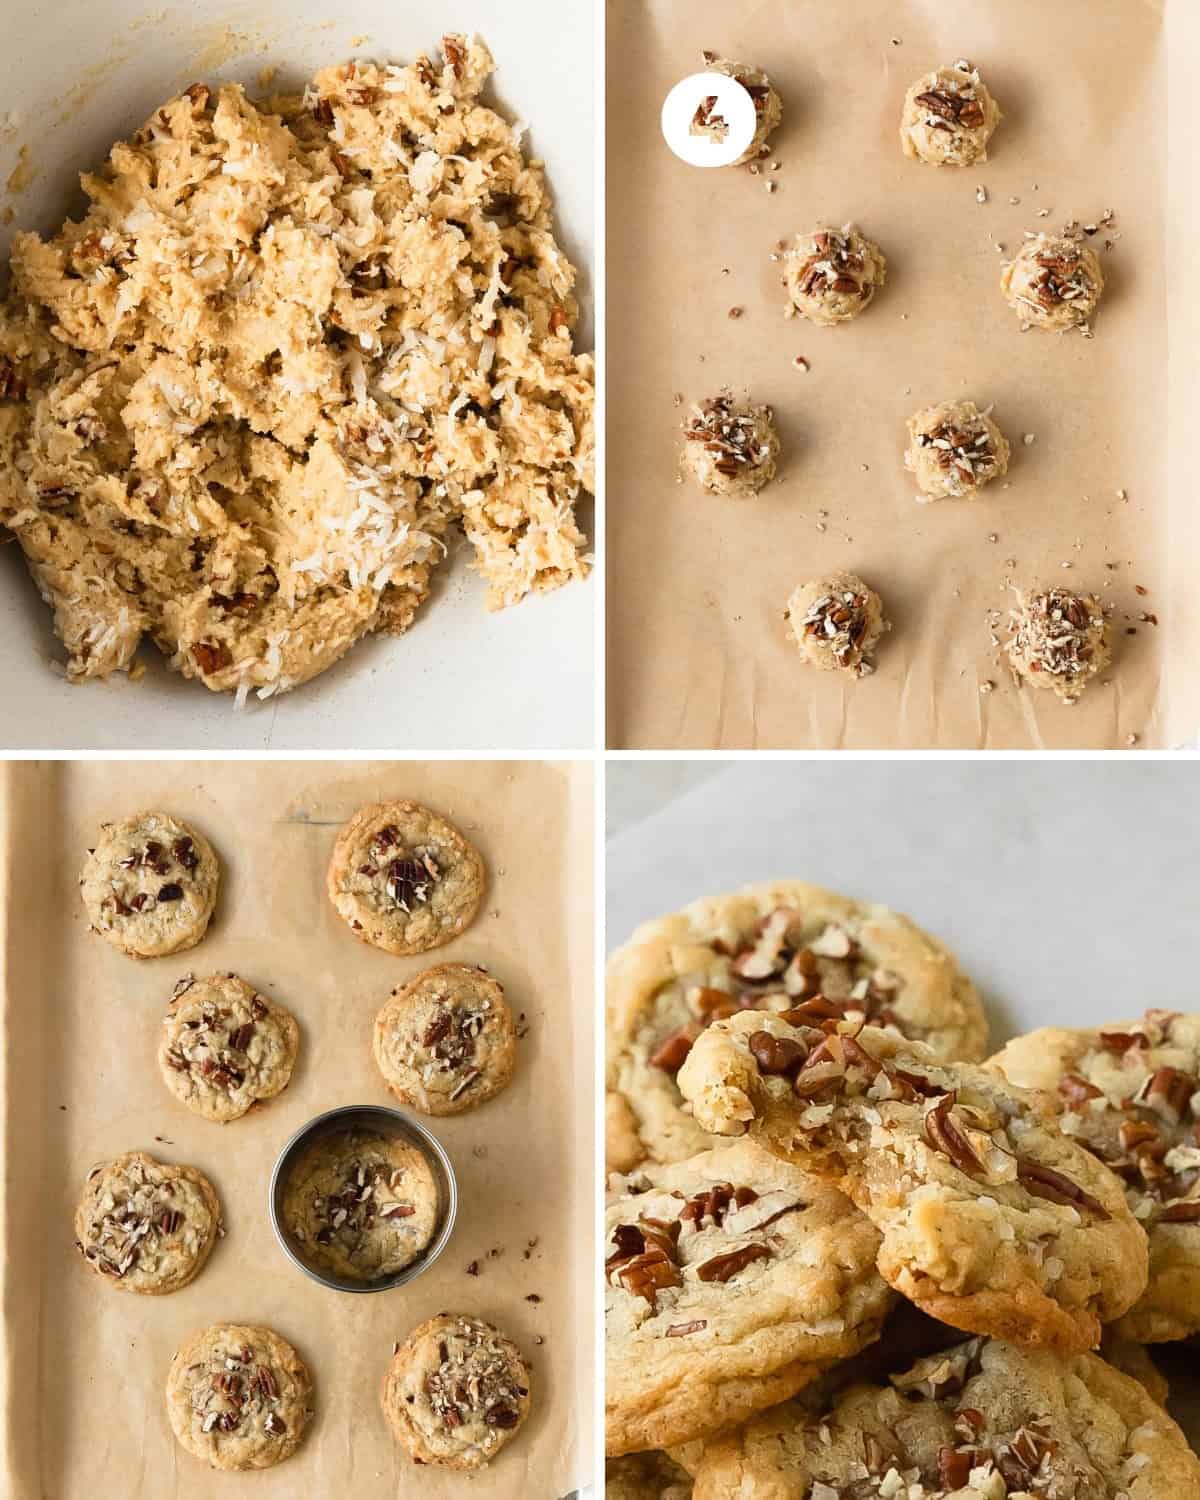 Preheat the oven to 375 F (190 C) for about 20 - 30 minutes before baking the cookies. Line a large baking sheet with parchment paper. Using a medium cookie scoop (2 tablespoons, 30 ml), scoop the coconut and pecan cookie dough into balls and place onto the lined baking sheet about 3 inches ( 8 cm) apart. Bake at 375 F (190 C) for 9 -11 minutes or until the edges of the cookies are set and are a light golden brown. Reshape any cookies using a biscuit or cookie cutter slightly wider than the cookie. Place the cutter over the cookies so the edges of the cookie are inside the cookie/ biscuit cutter. In a circular motion, gently nudge the edges back into a round shape. Cool the chewy pecan coconut cookies on the baking sheet for 5 minutes. Then transfer to a cooling rack to cool completely to room temperature and enjoy.